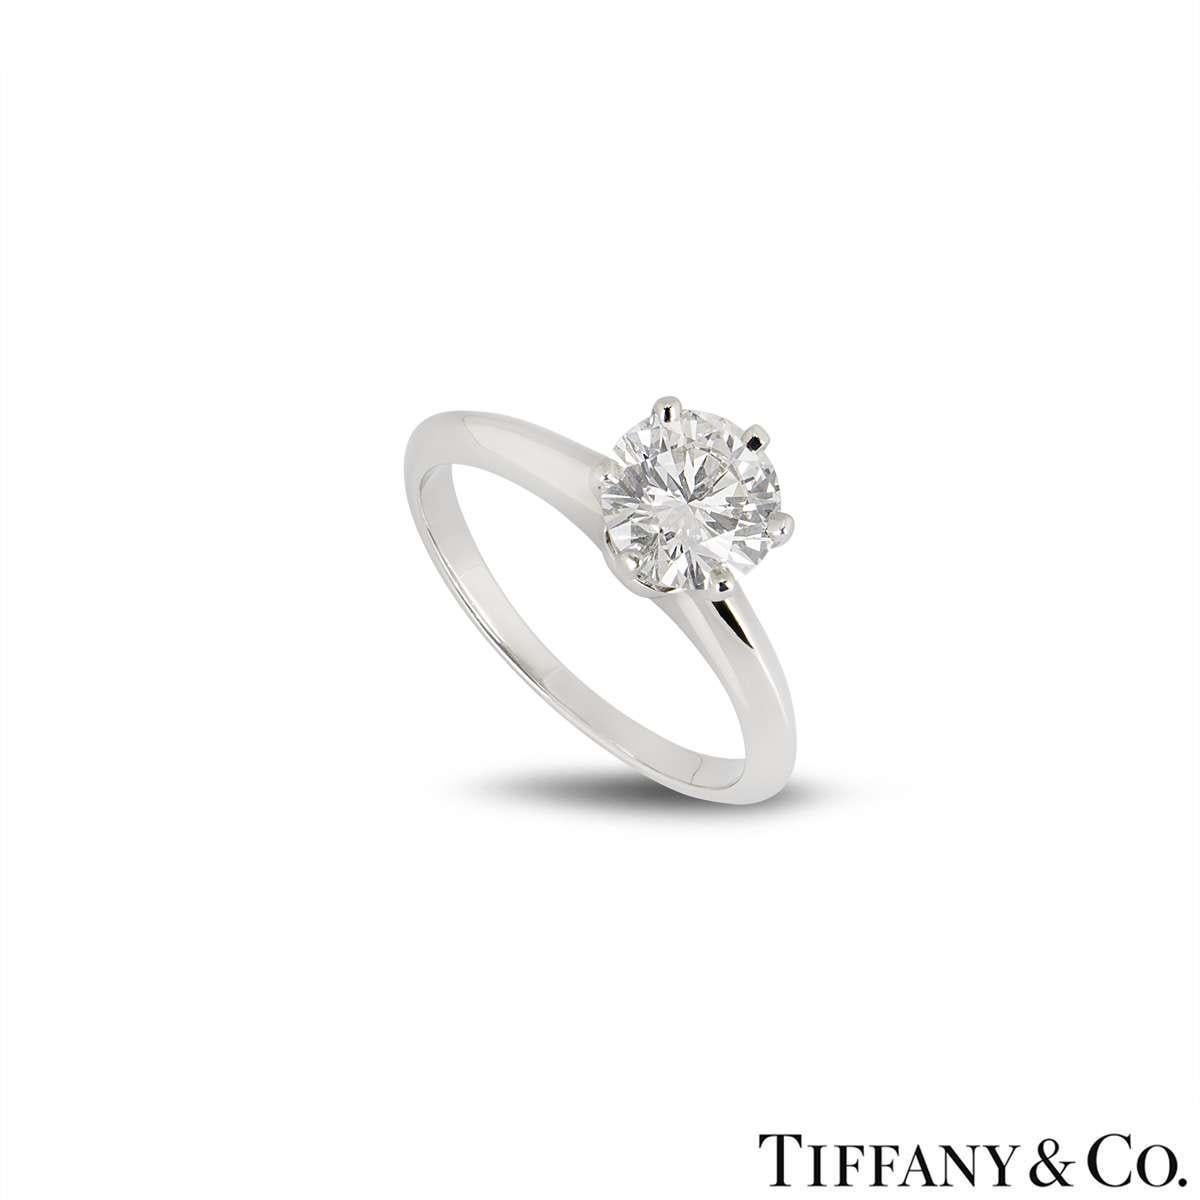 A stunning diamond ring by Tiffany & Co. from the Setting collection. The ring comprises of a round brilliant cut diamond in a six claw setting with a weight of 1.01ct, D colour and VS1 clarity. The ring is a size UK J½, EU 49 and US 4¾ but can be